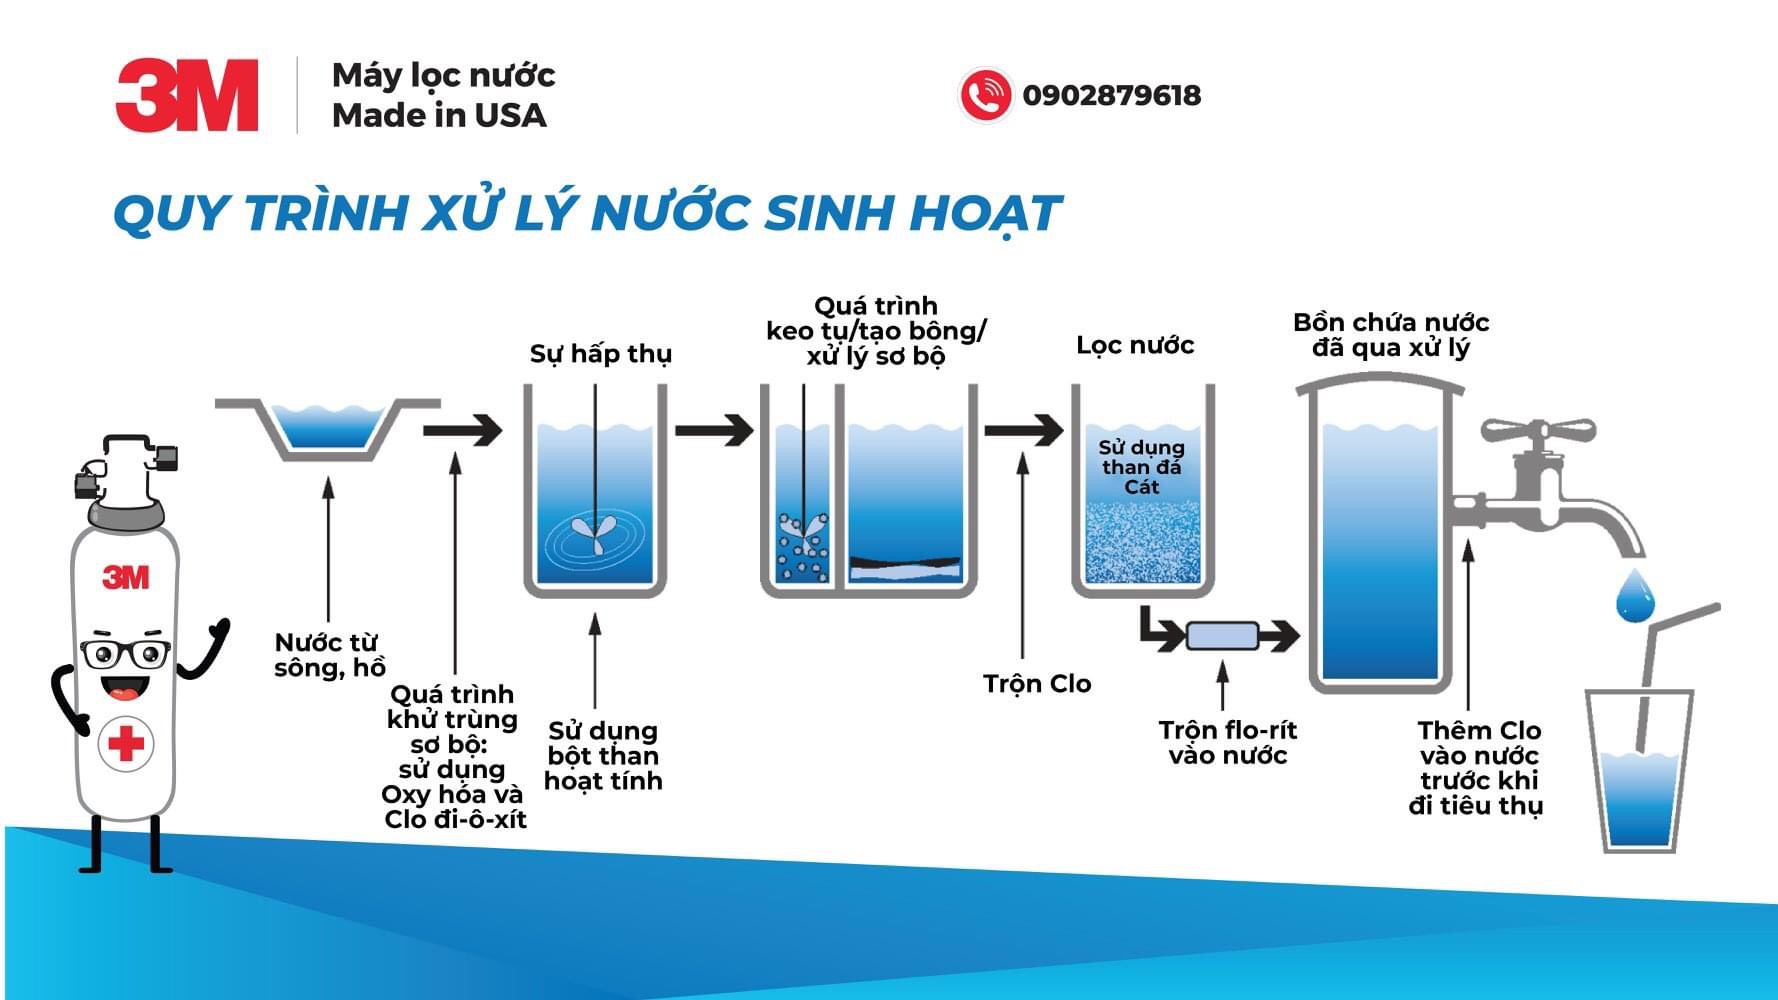 quy-trinh-xu-ly-nuoc-sinh-hoat-may-loc-nuoc-3m